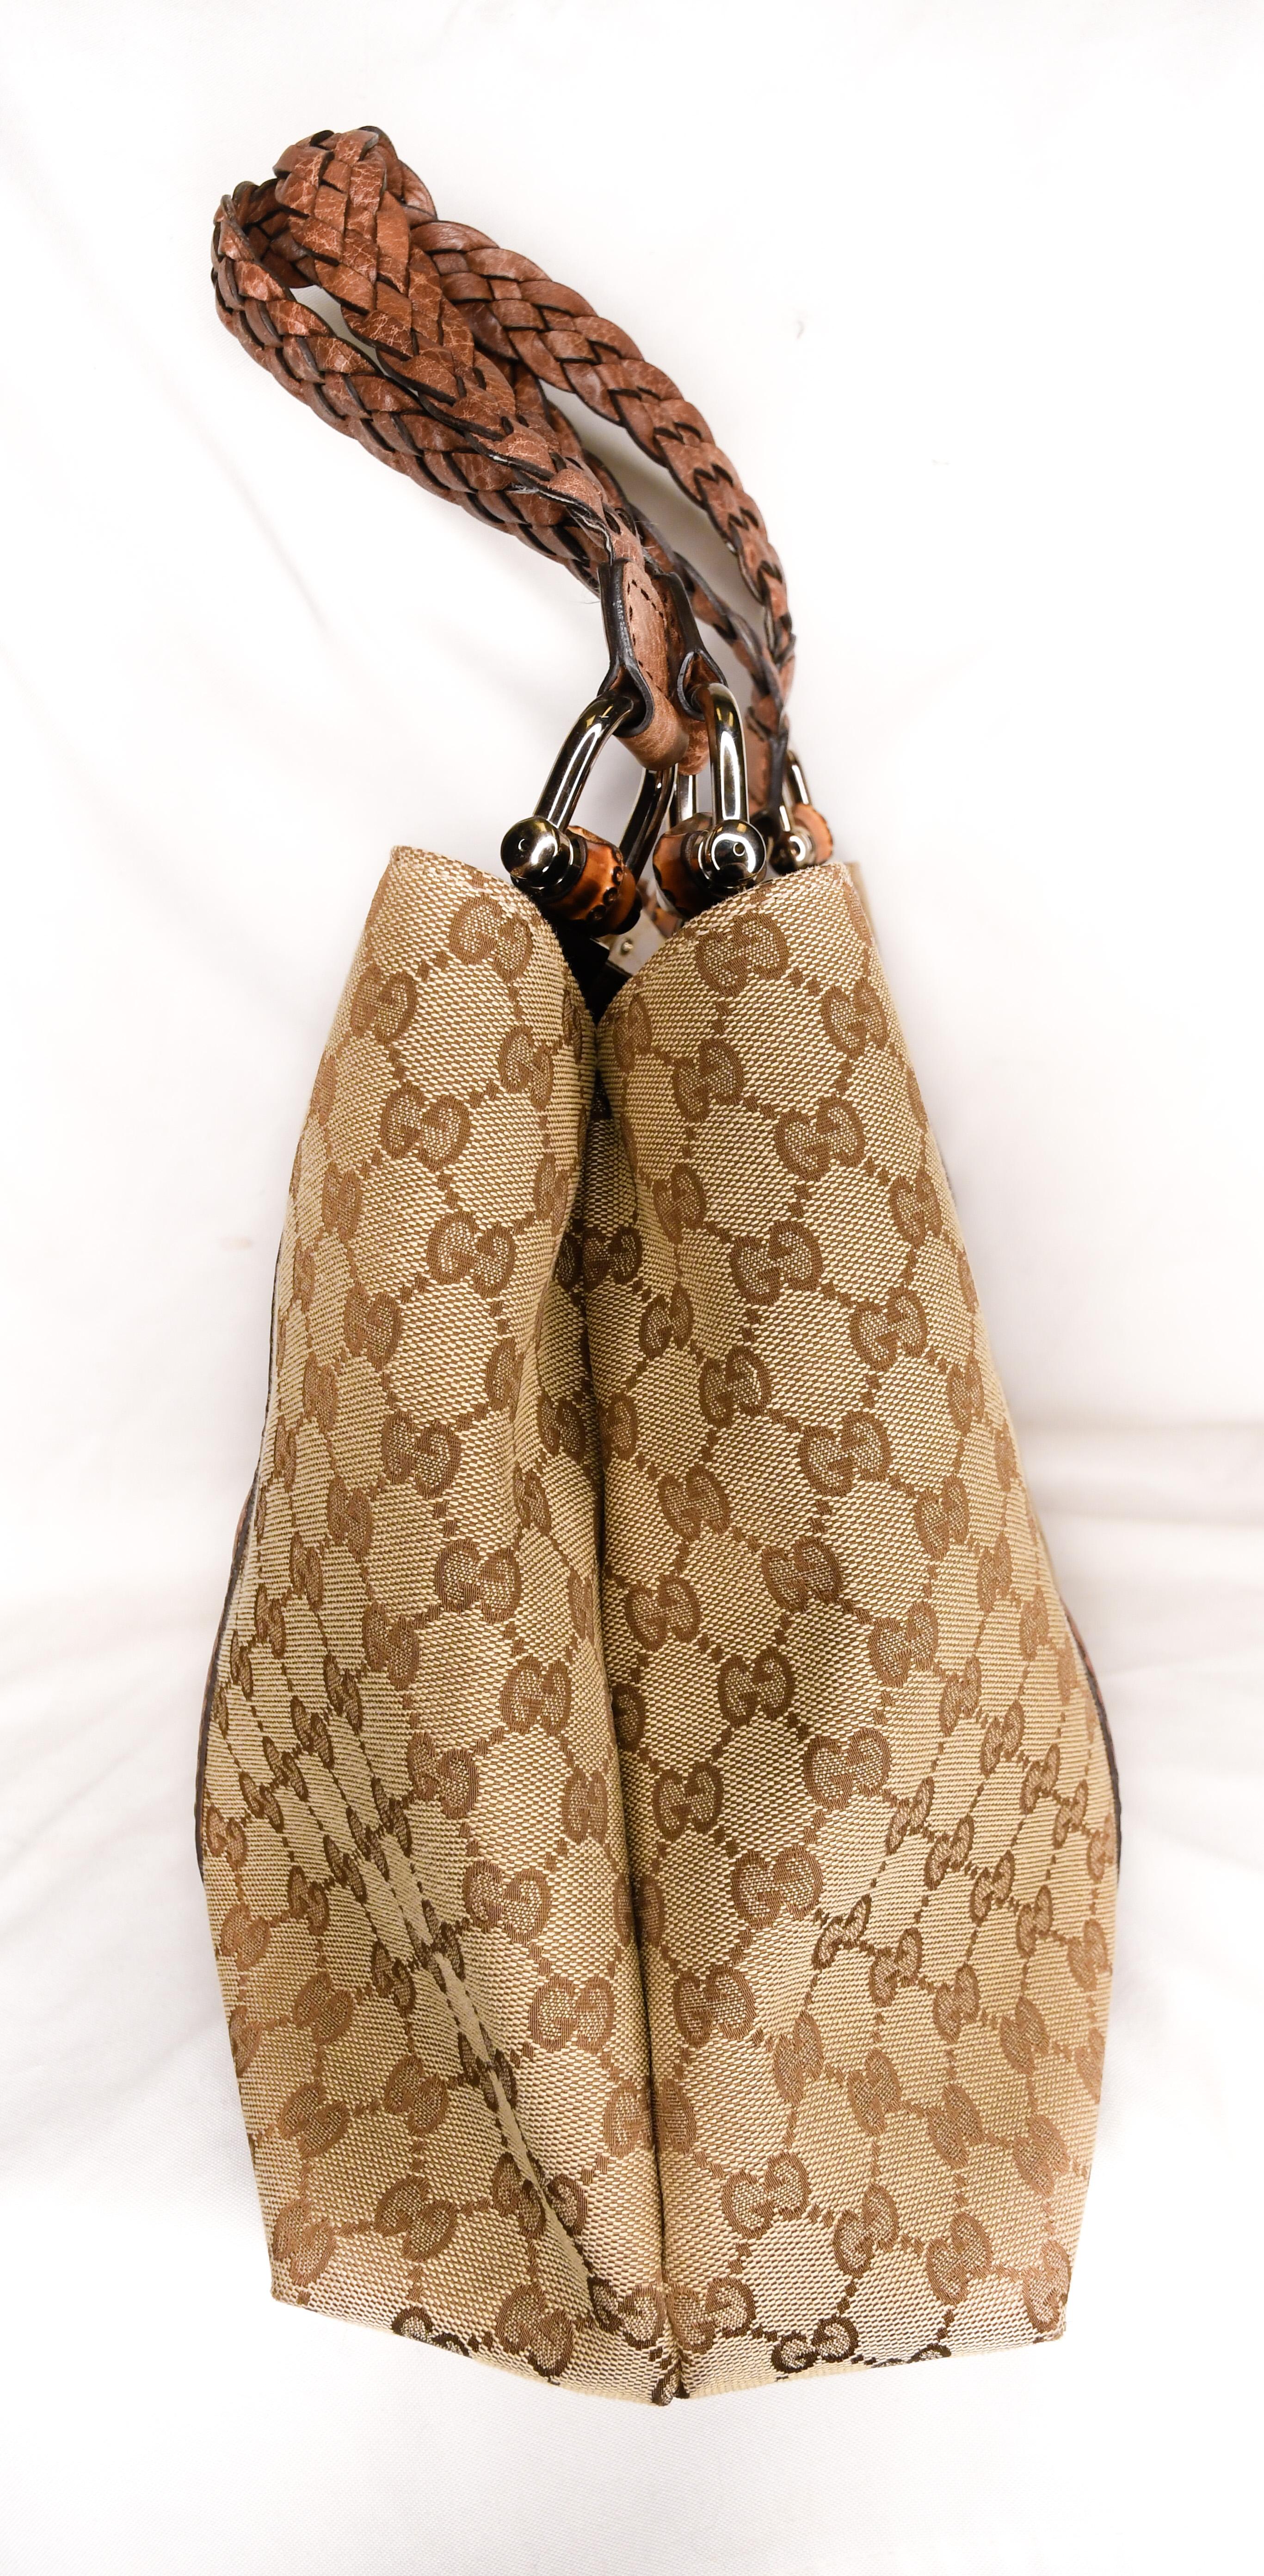 Vintage Gucci monogram tote features iconic logo pattern allover, braided straps and bamboo accents on D rings.   Brown logo jacquard fabric Interior has three large compartments.  Middle compartment is zippered.  Two accessories pockets and one